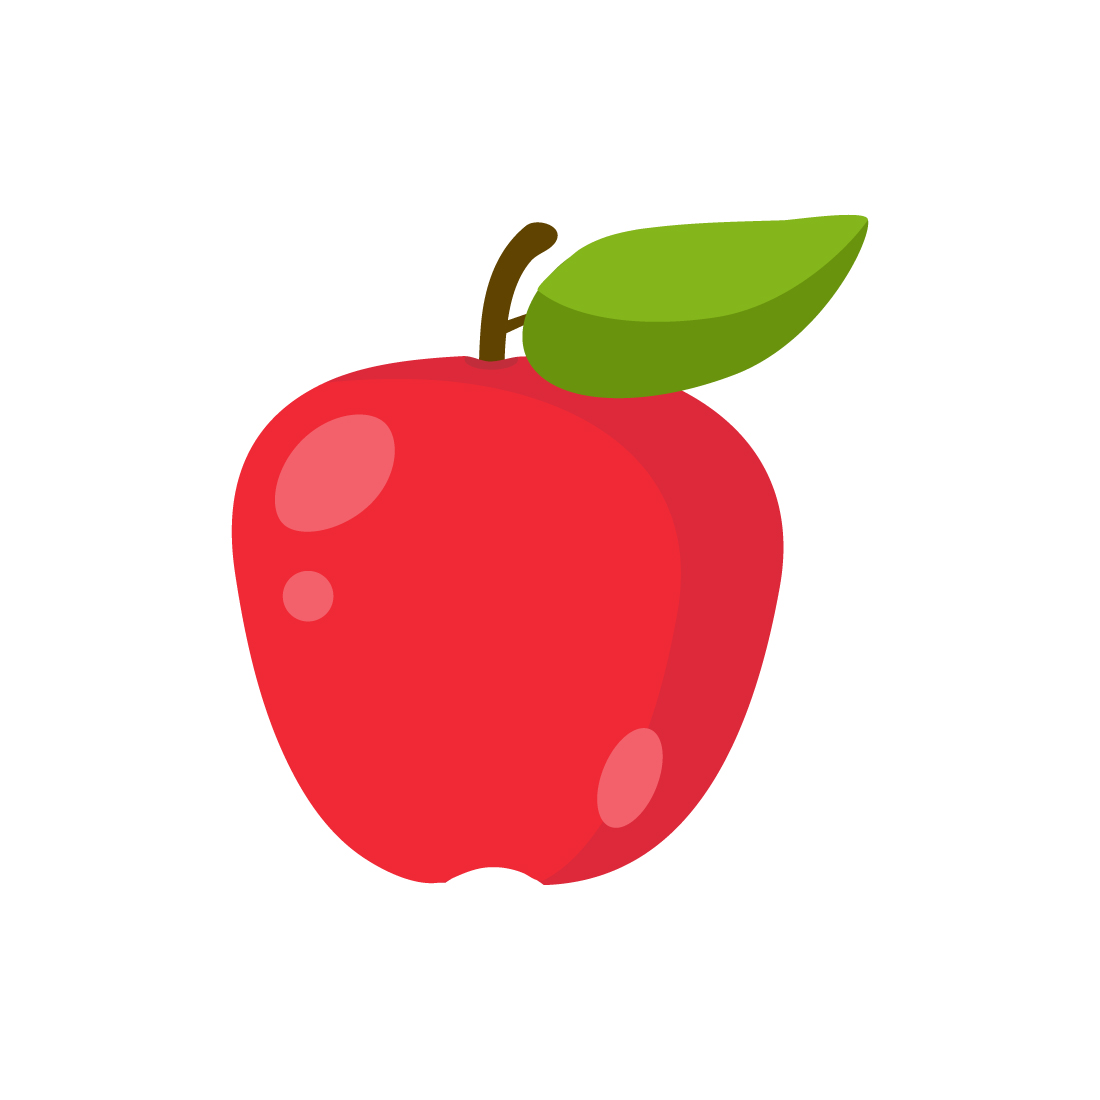 Red Apple Illustration On White Background cover image.